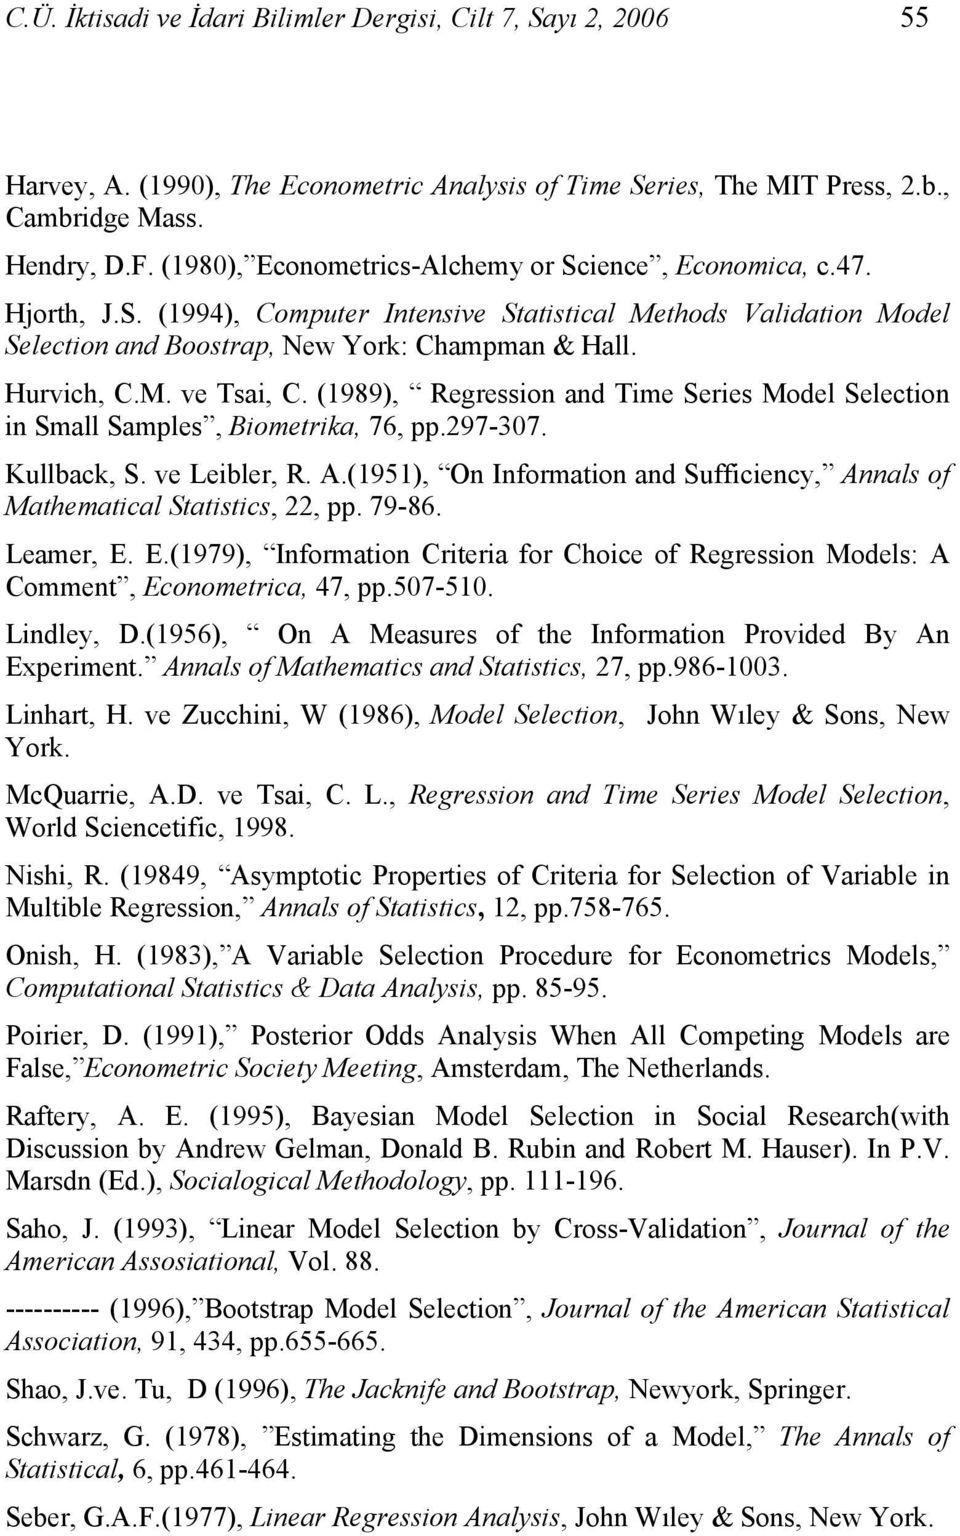 (1989), Regressio ad Time Series Model Selectio i Small Samples, Biometrika, 76, pp.97-307. Kullback, S. ve Leibler, R. A.(1951), O Iformatio ad Sufficiecy, Aals of Mathematical Statistics,, pp.